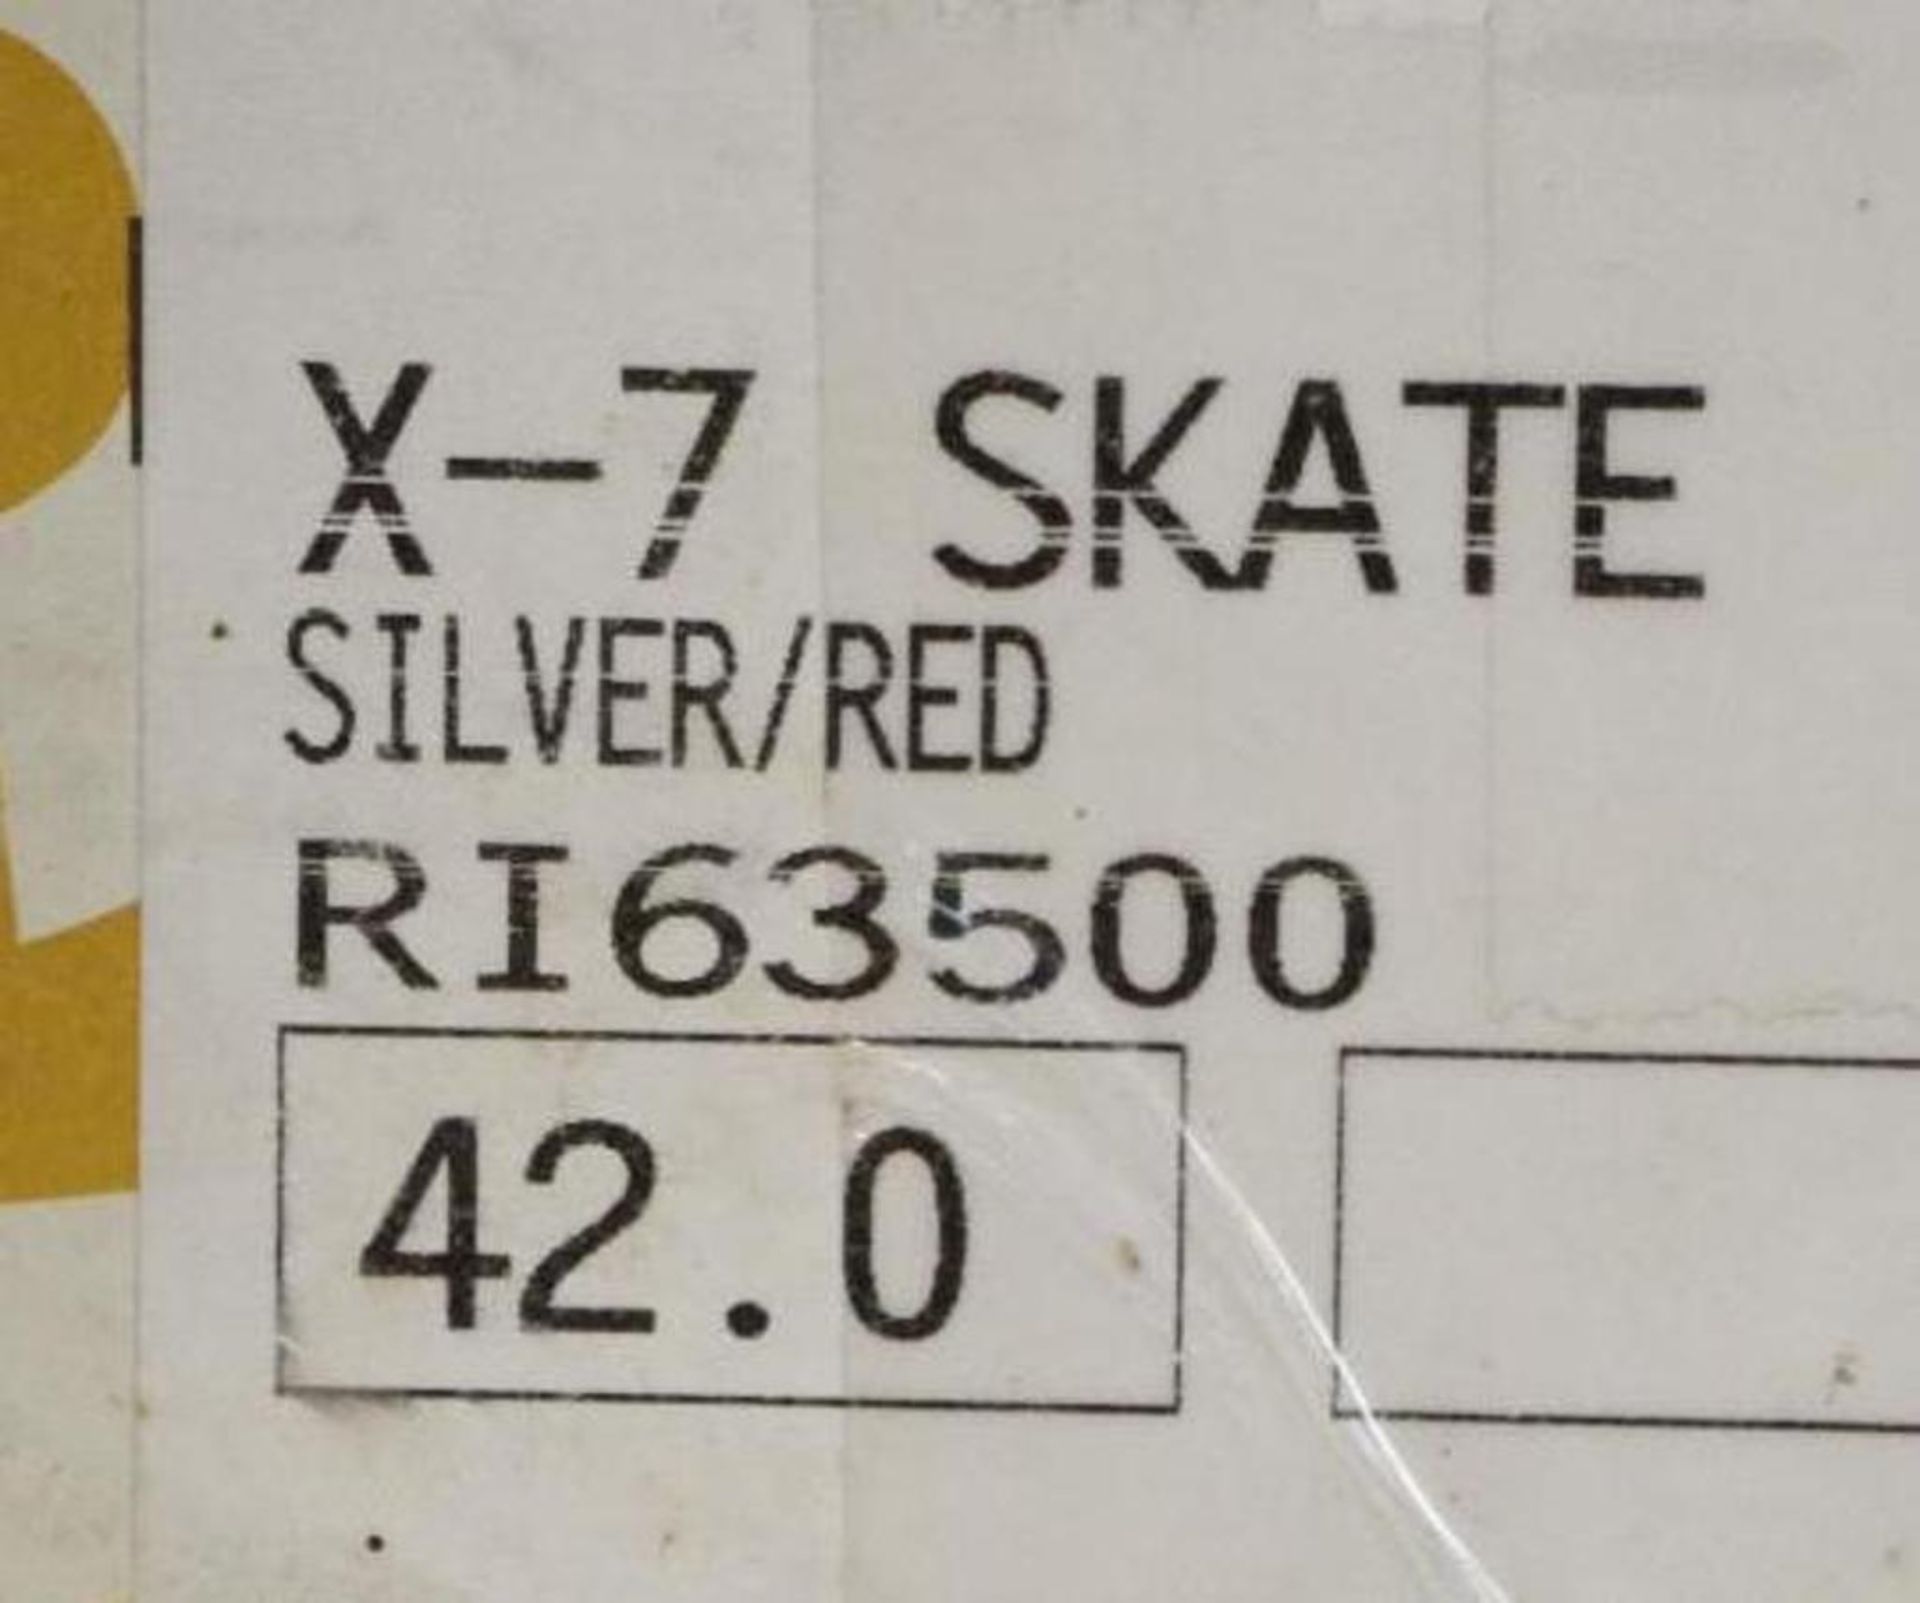 ROSSIGNOL Silver/Red X-7 Skate Boots, Size 42 EU M/N RI63500 (1 Pair) - Image 3 of 3